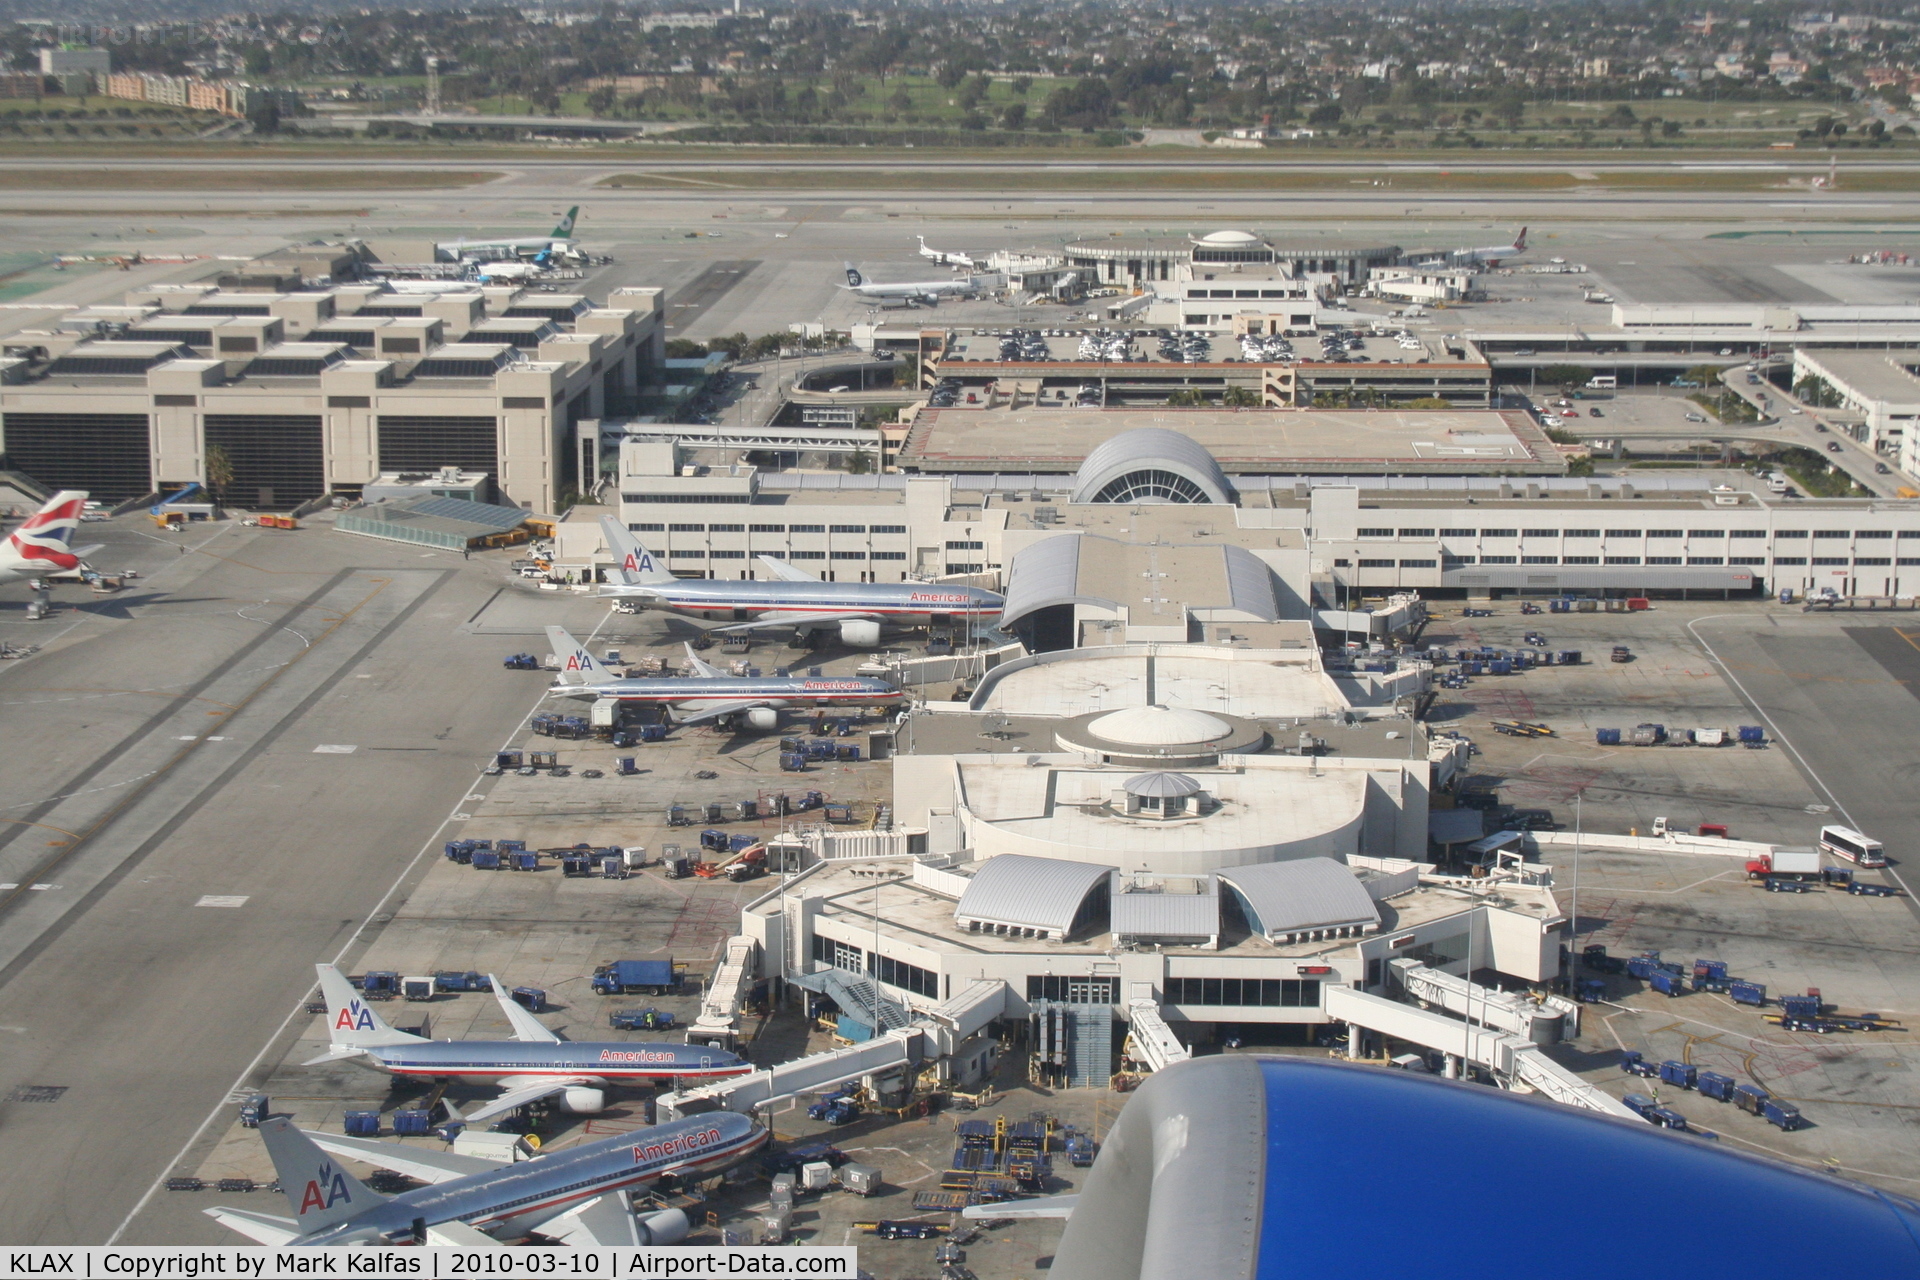 Los Angeles International Airport (LAX) - American Airlines Terminal 4 on the climb out from 25R KLAX.